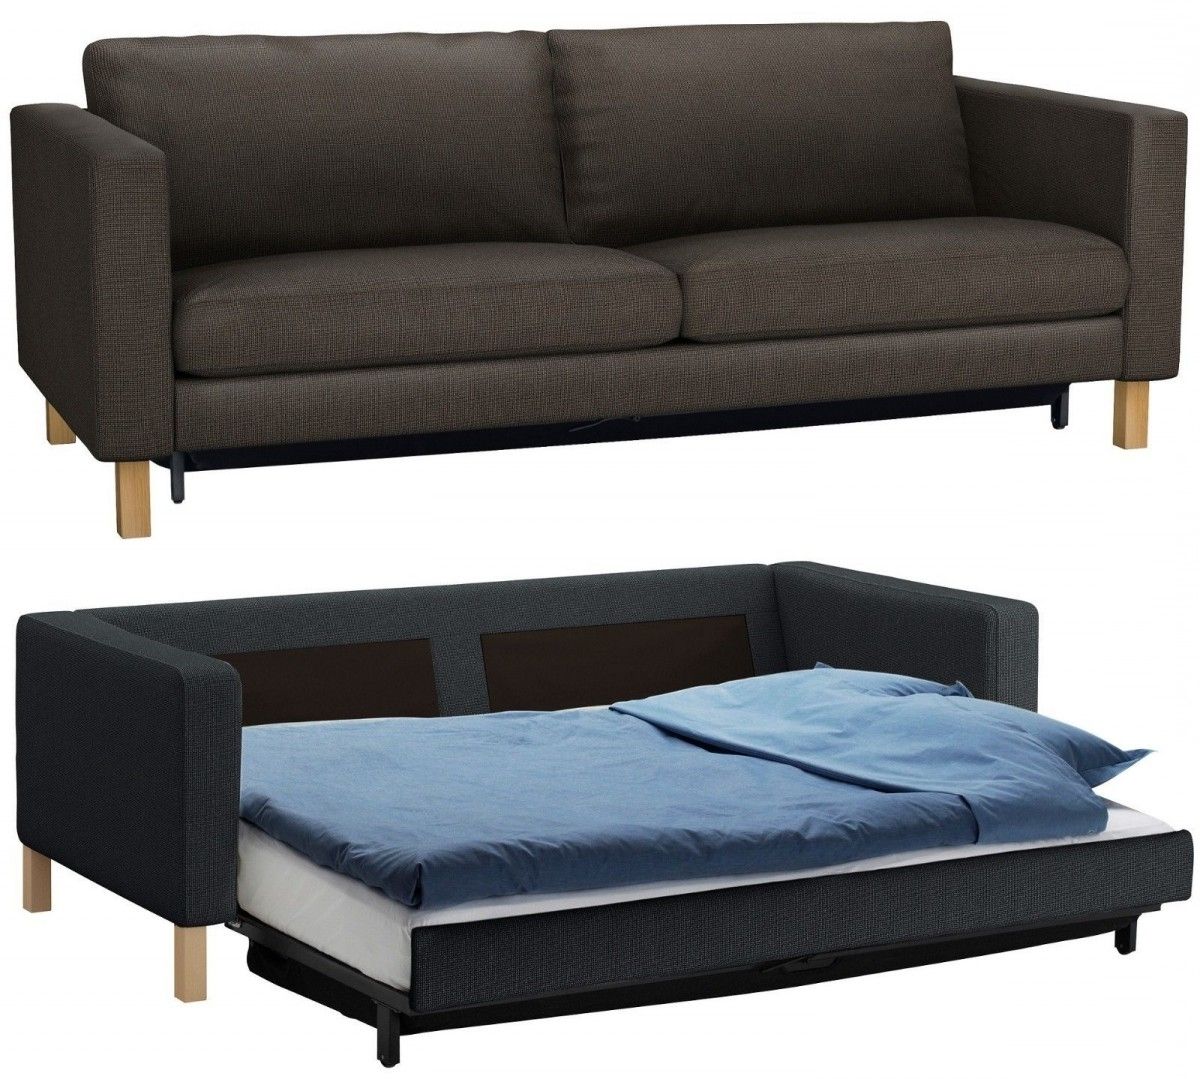 About The Ikea Sleeper Sofa : S3net – Sectional Sofas Sale Intended For Most Up To Date Ikea Sectional Sleeper Sofas (View 8 of 20)